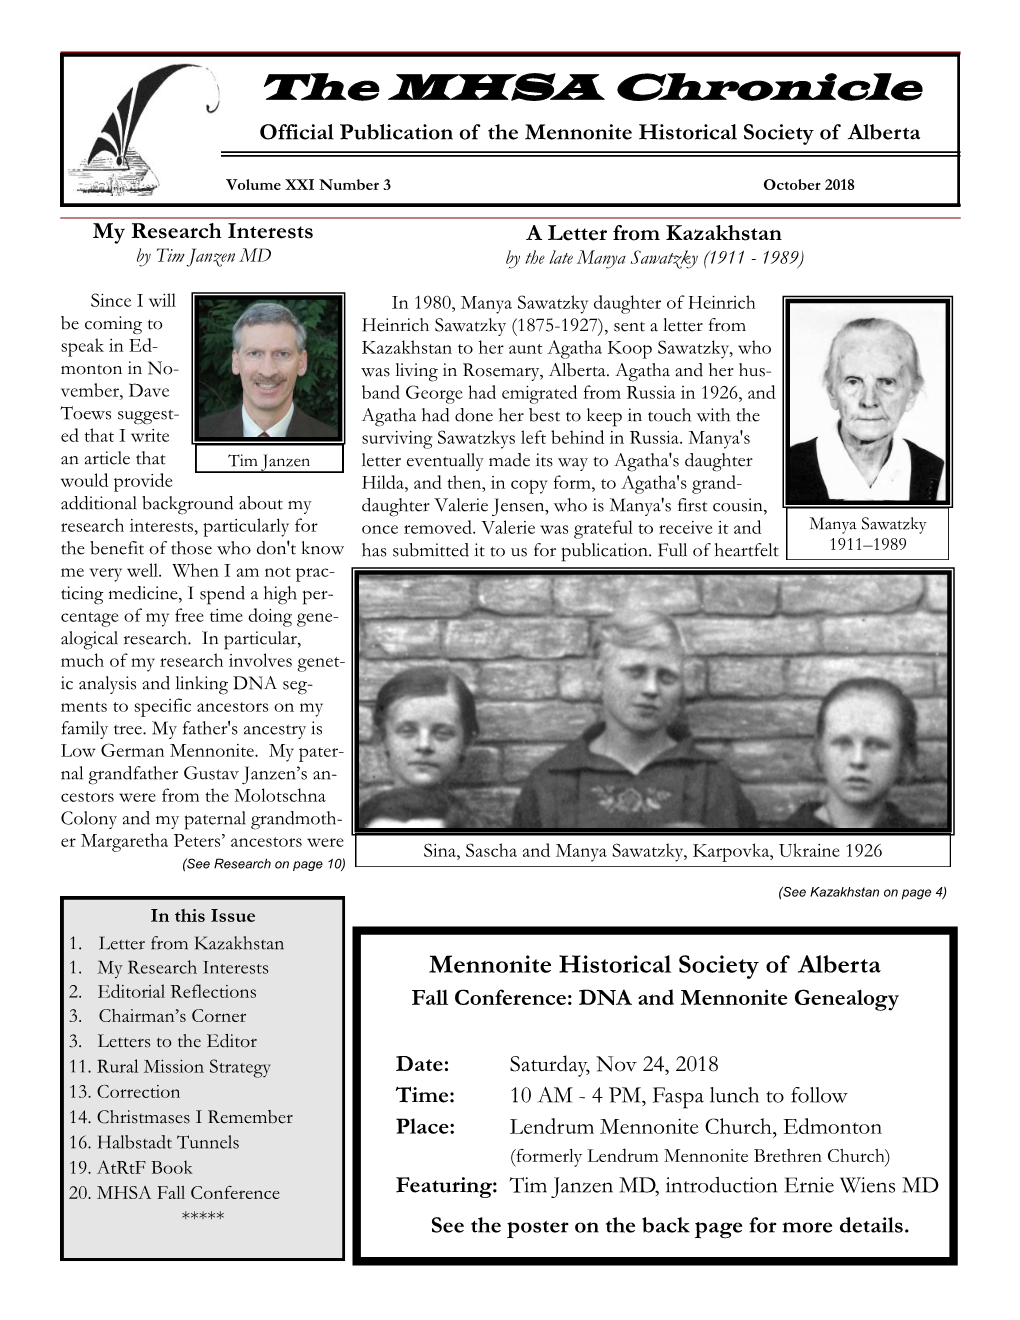 The MHSA Chronicle Official Publication of the Mennonite Historical Society of Alberta